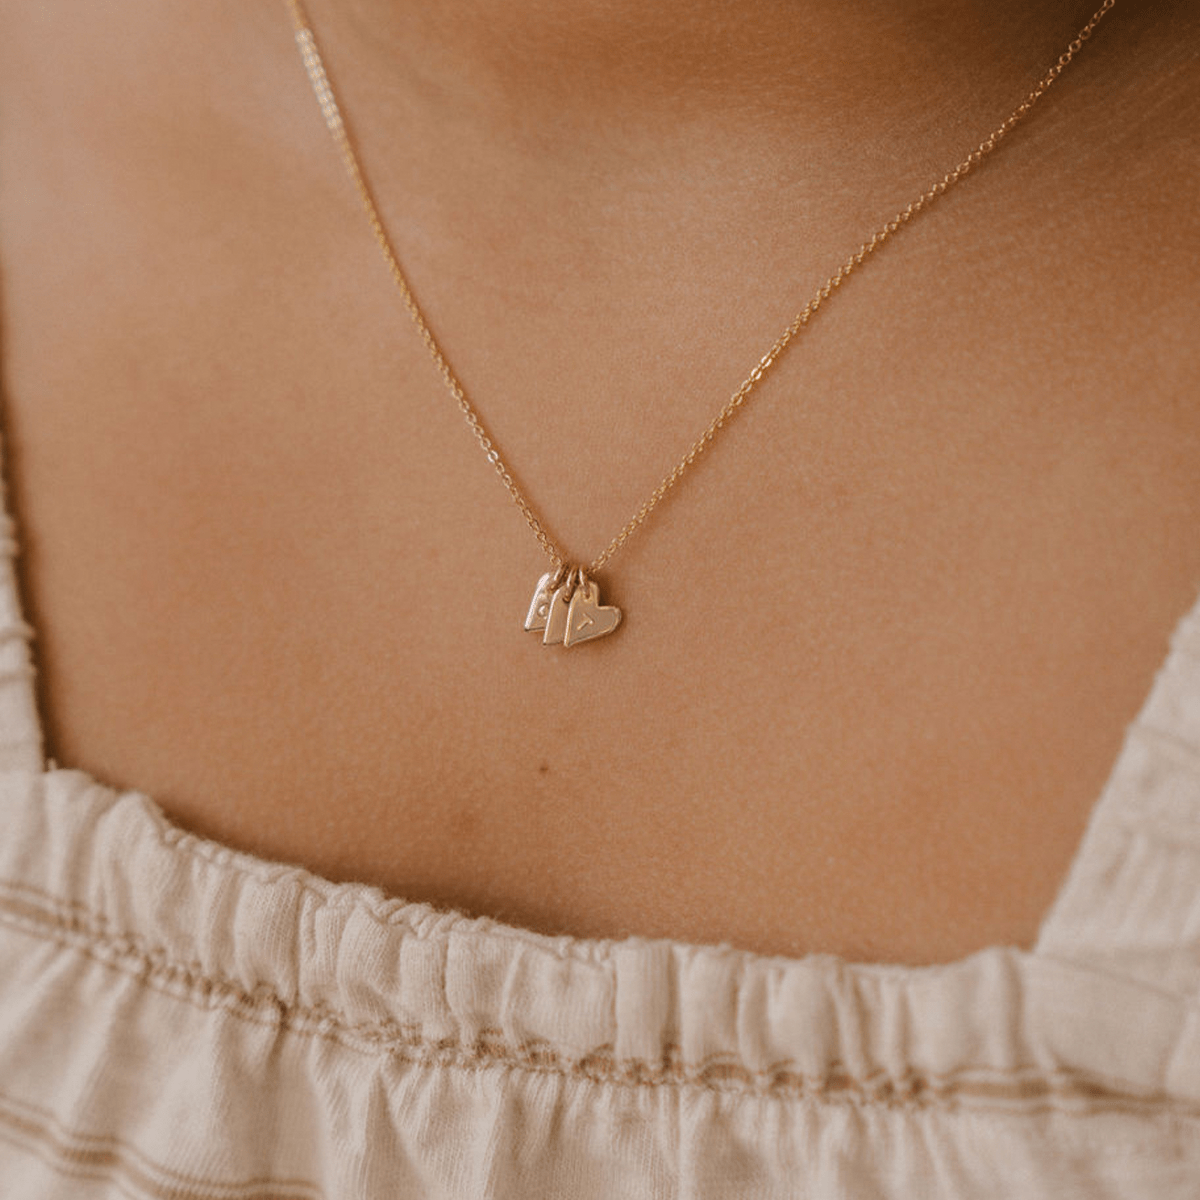 Sweetheart Chain in Gold Filled